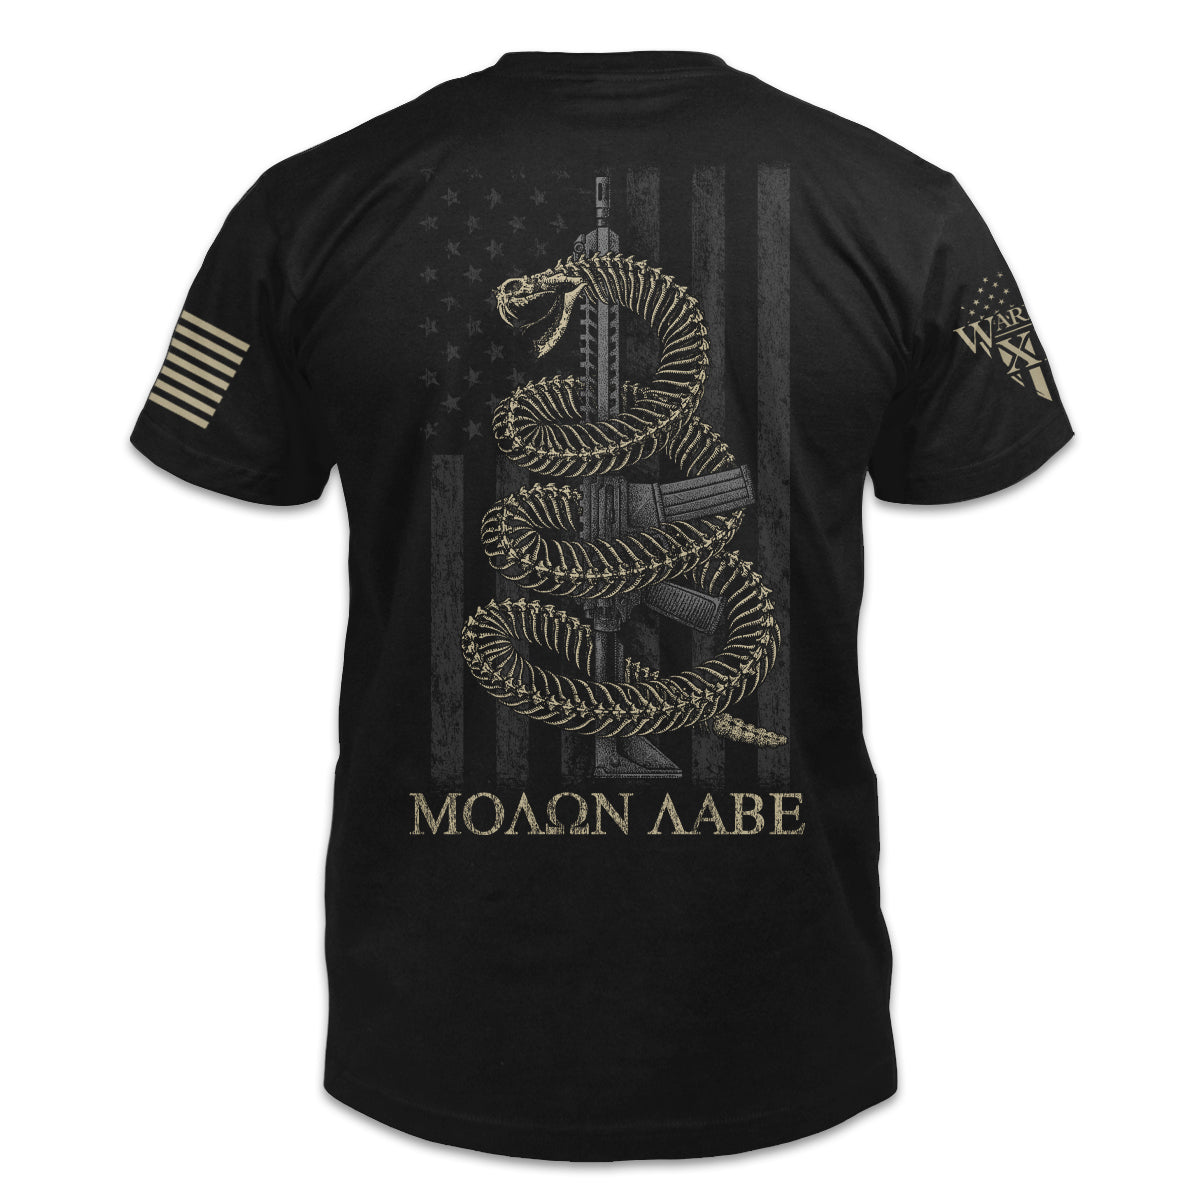 A black t-shirt  features a coiled skeletal rattlesnake ready to defend an AR-15 printed on the back of the shirt.